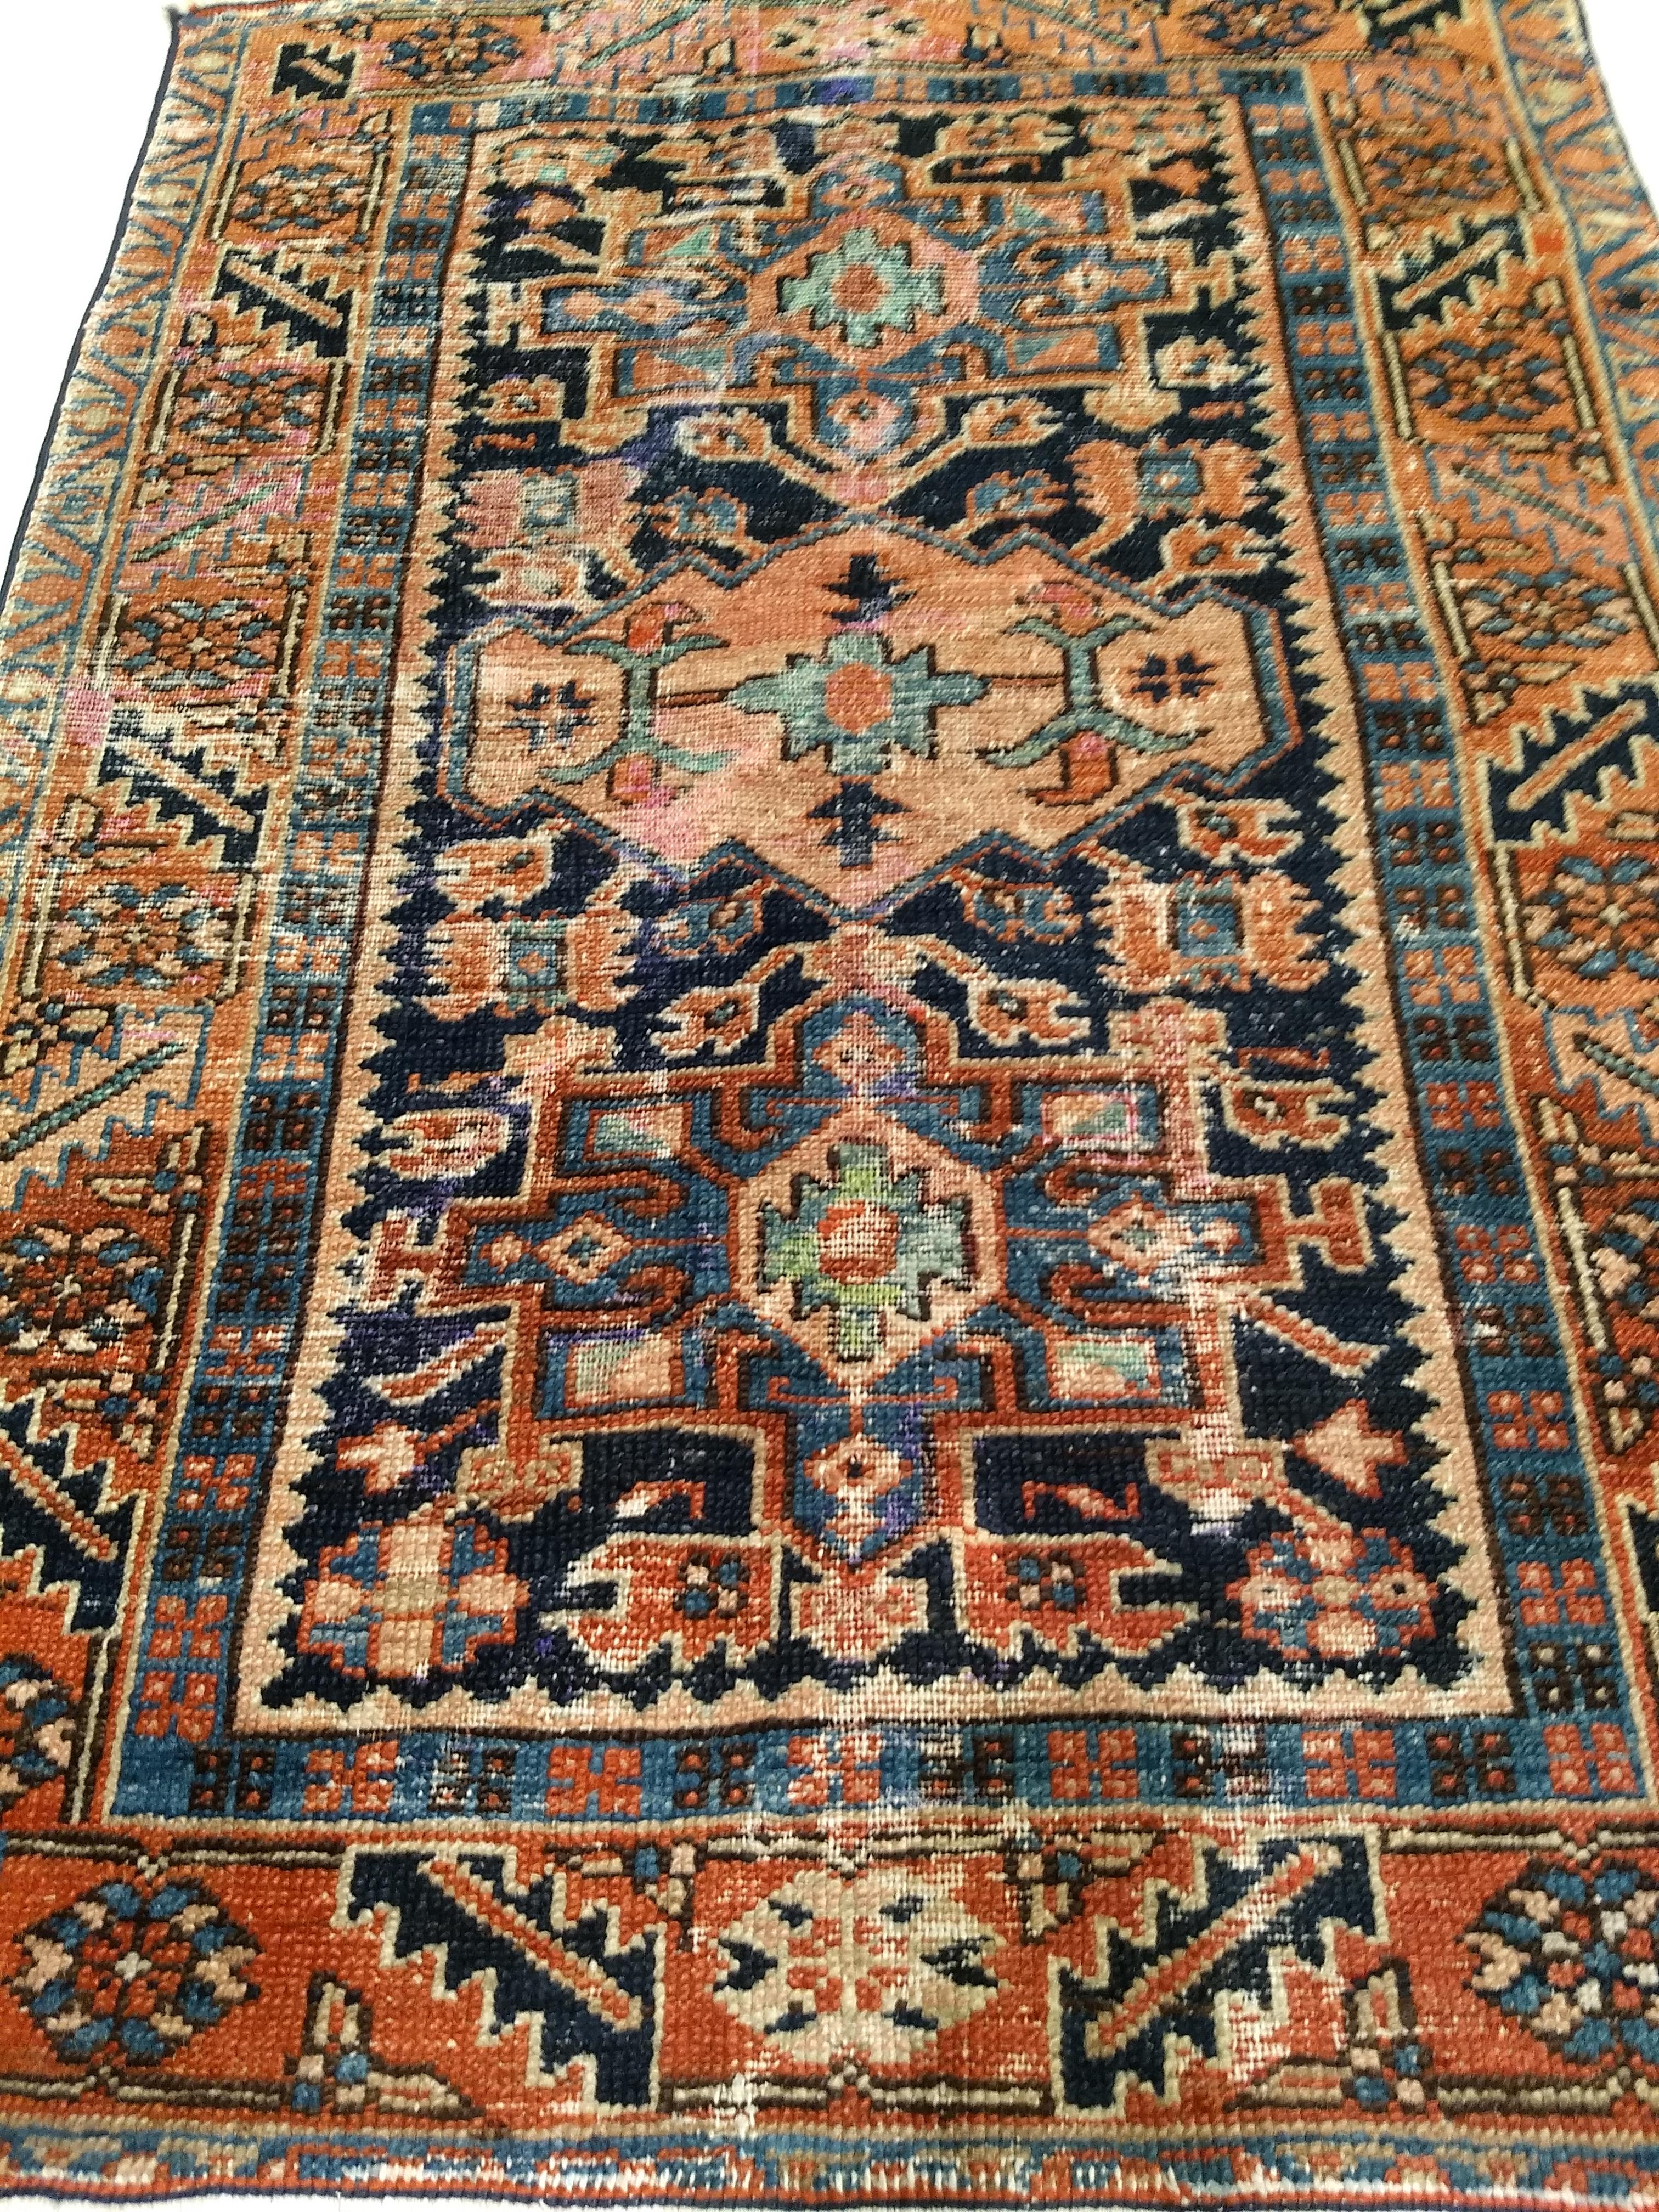 A beautiful handwoven Persian Karajeh area rug from the 1st quarter of the 1900s.  The rug has a “distressed look” with a traditional Karajeh design of 3 medallions set in a navy blue color field with the medallions in “abrash blue” and pink colors.